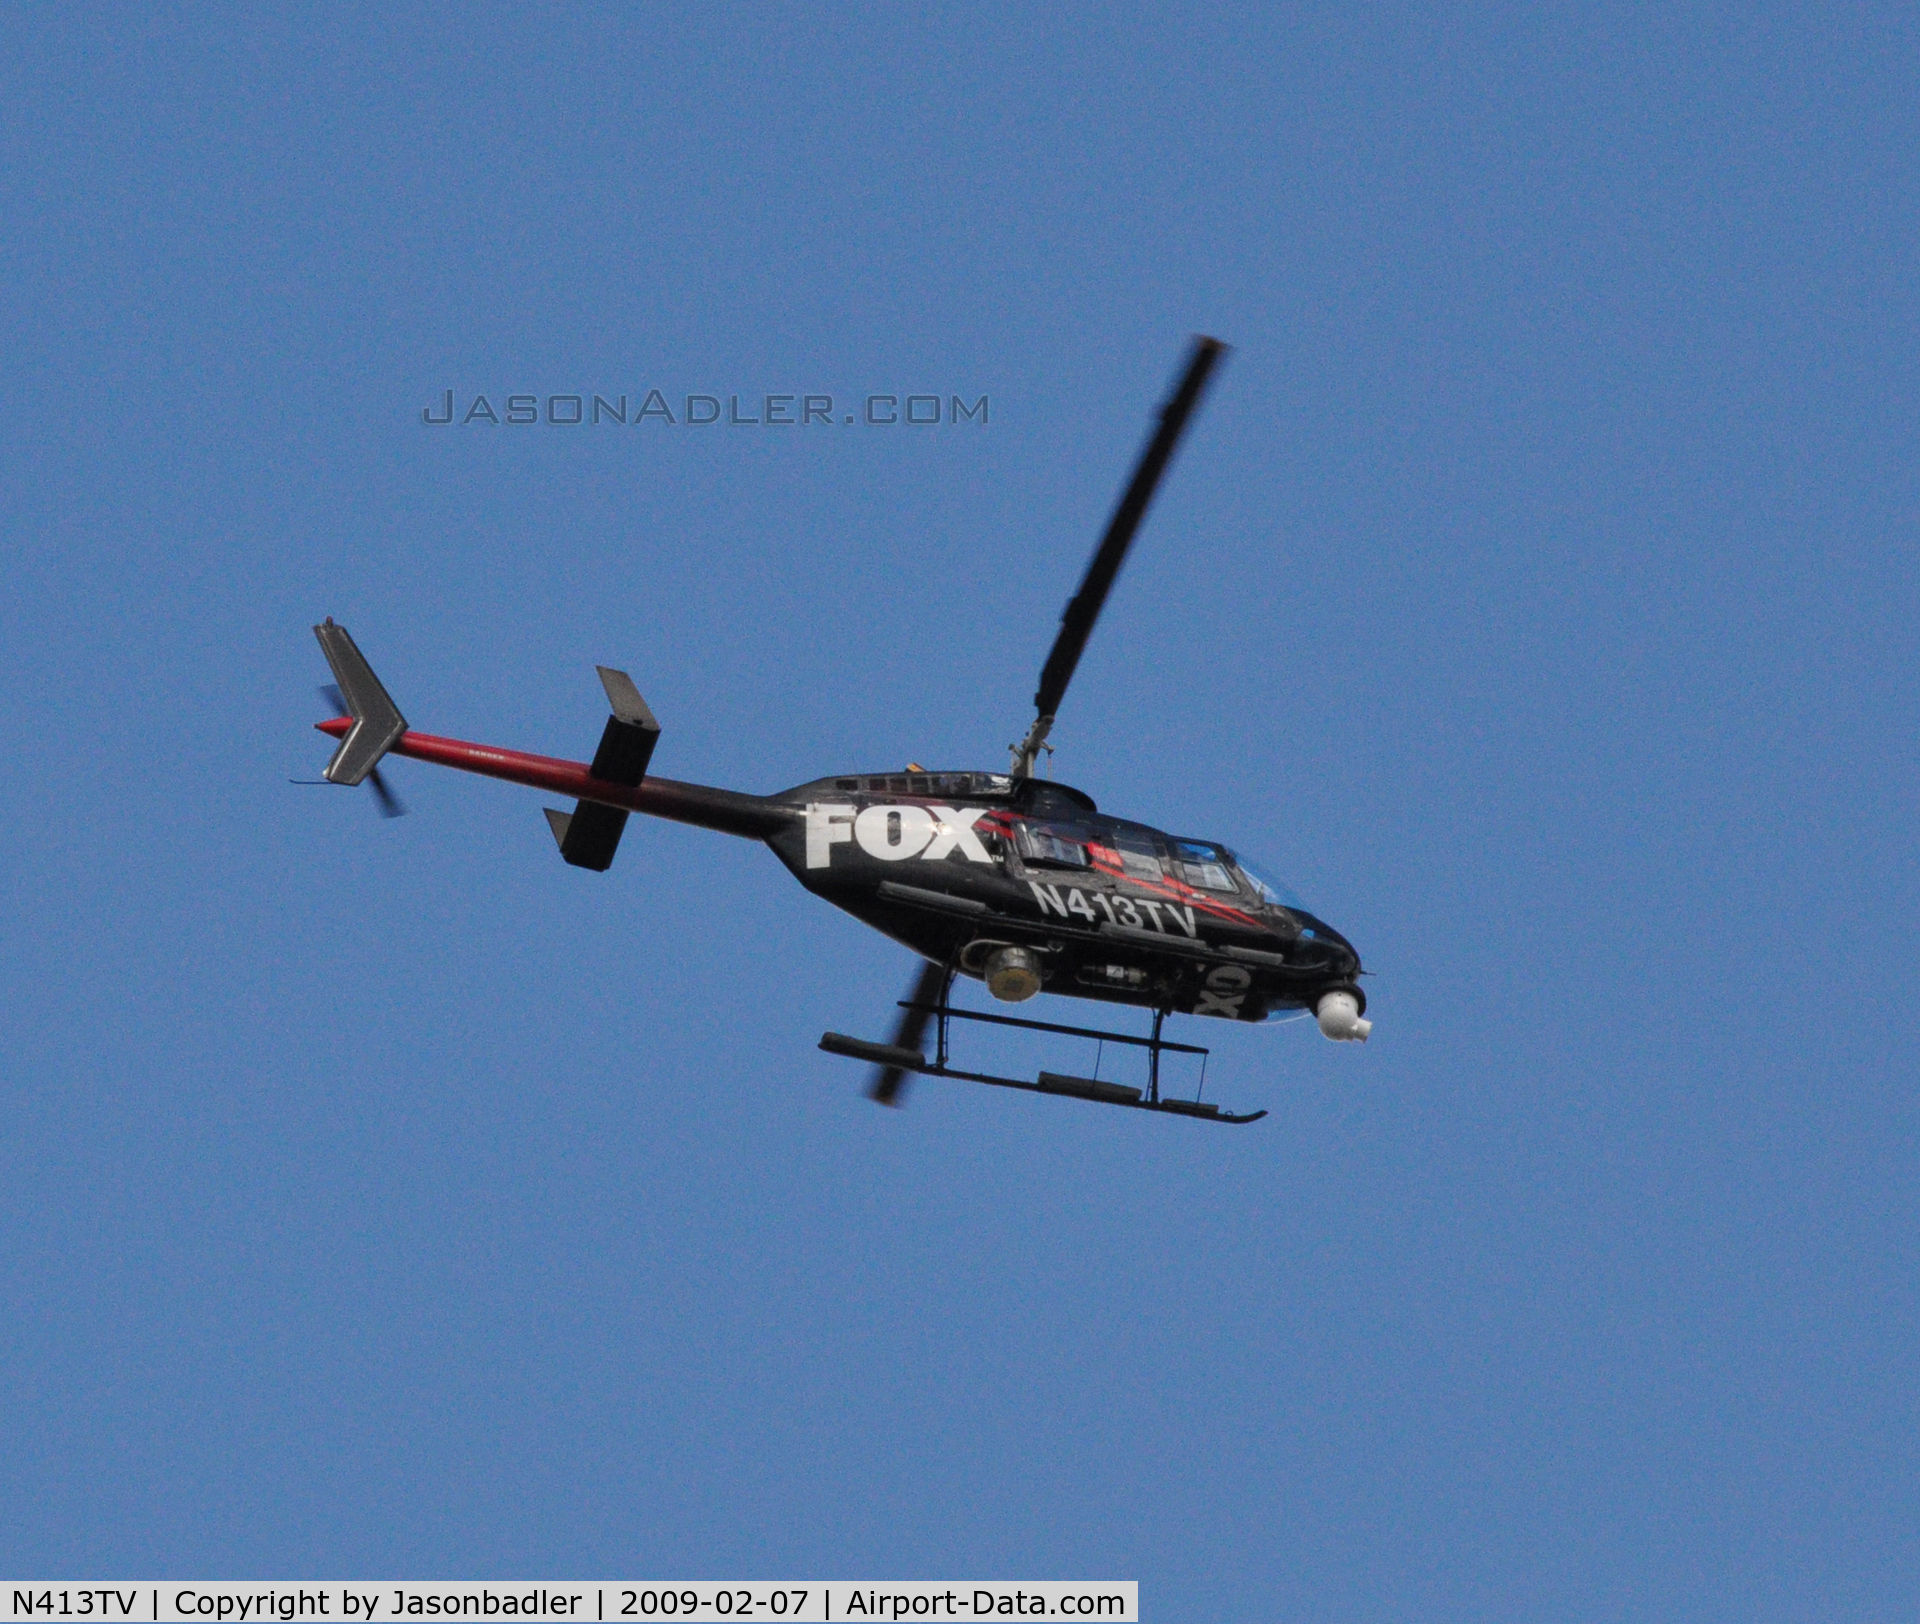 N413TV, 1981 Bell 206L-1 LongRanger II C/N 45636, Television helicopter flying by my house.